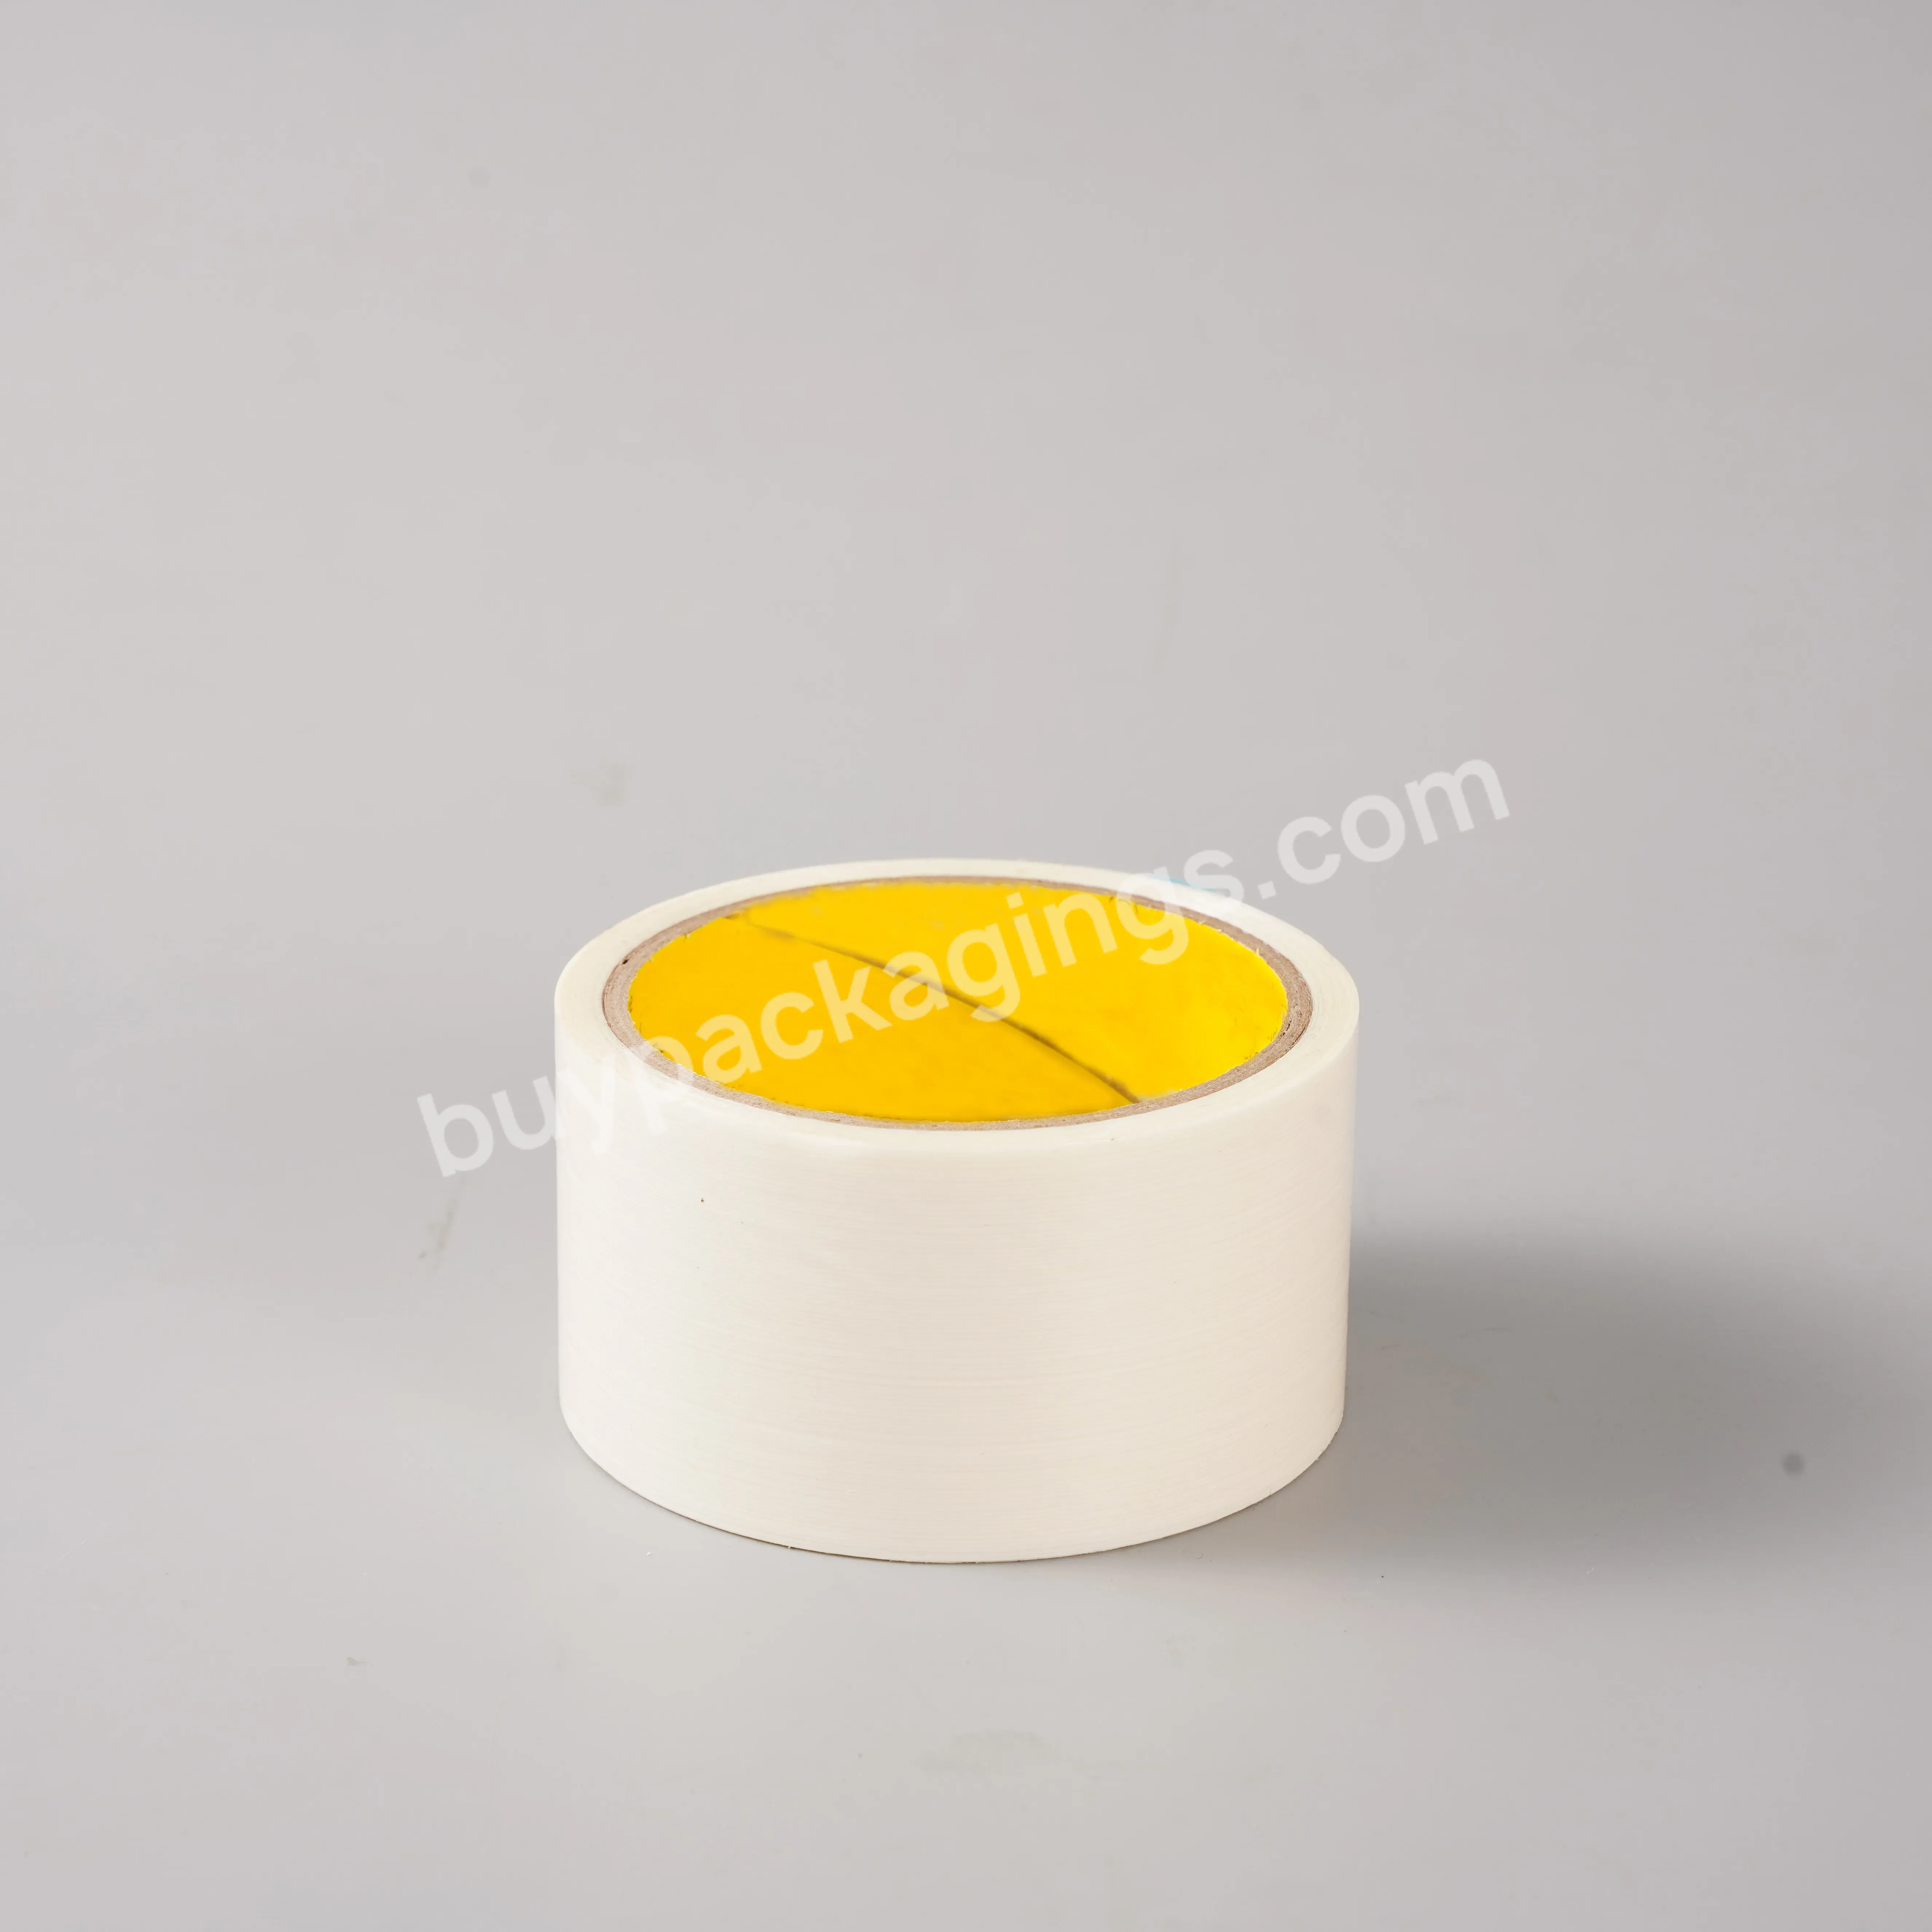 Manufacturers Direct Sales Of Encrypted Glass Fiber Tape Without Trace For Refrigerator Tape - Buy Glass Cltoh Silicone Tap,Fiberglass Packaging Tape,Cross Weave Tape.